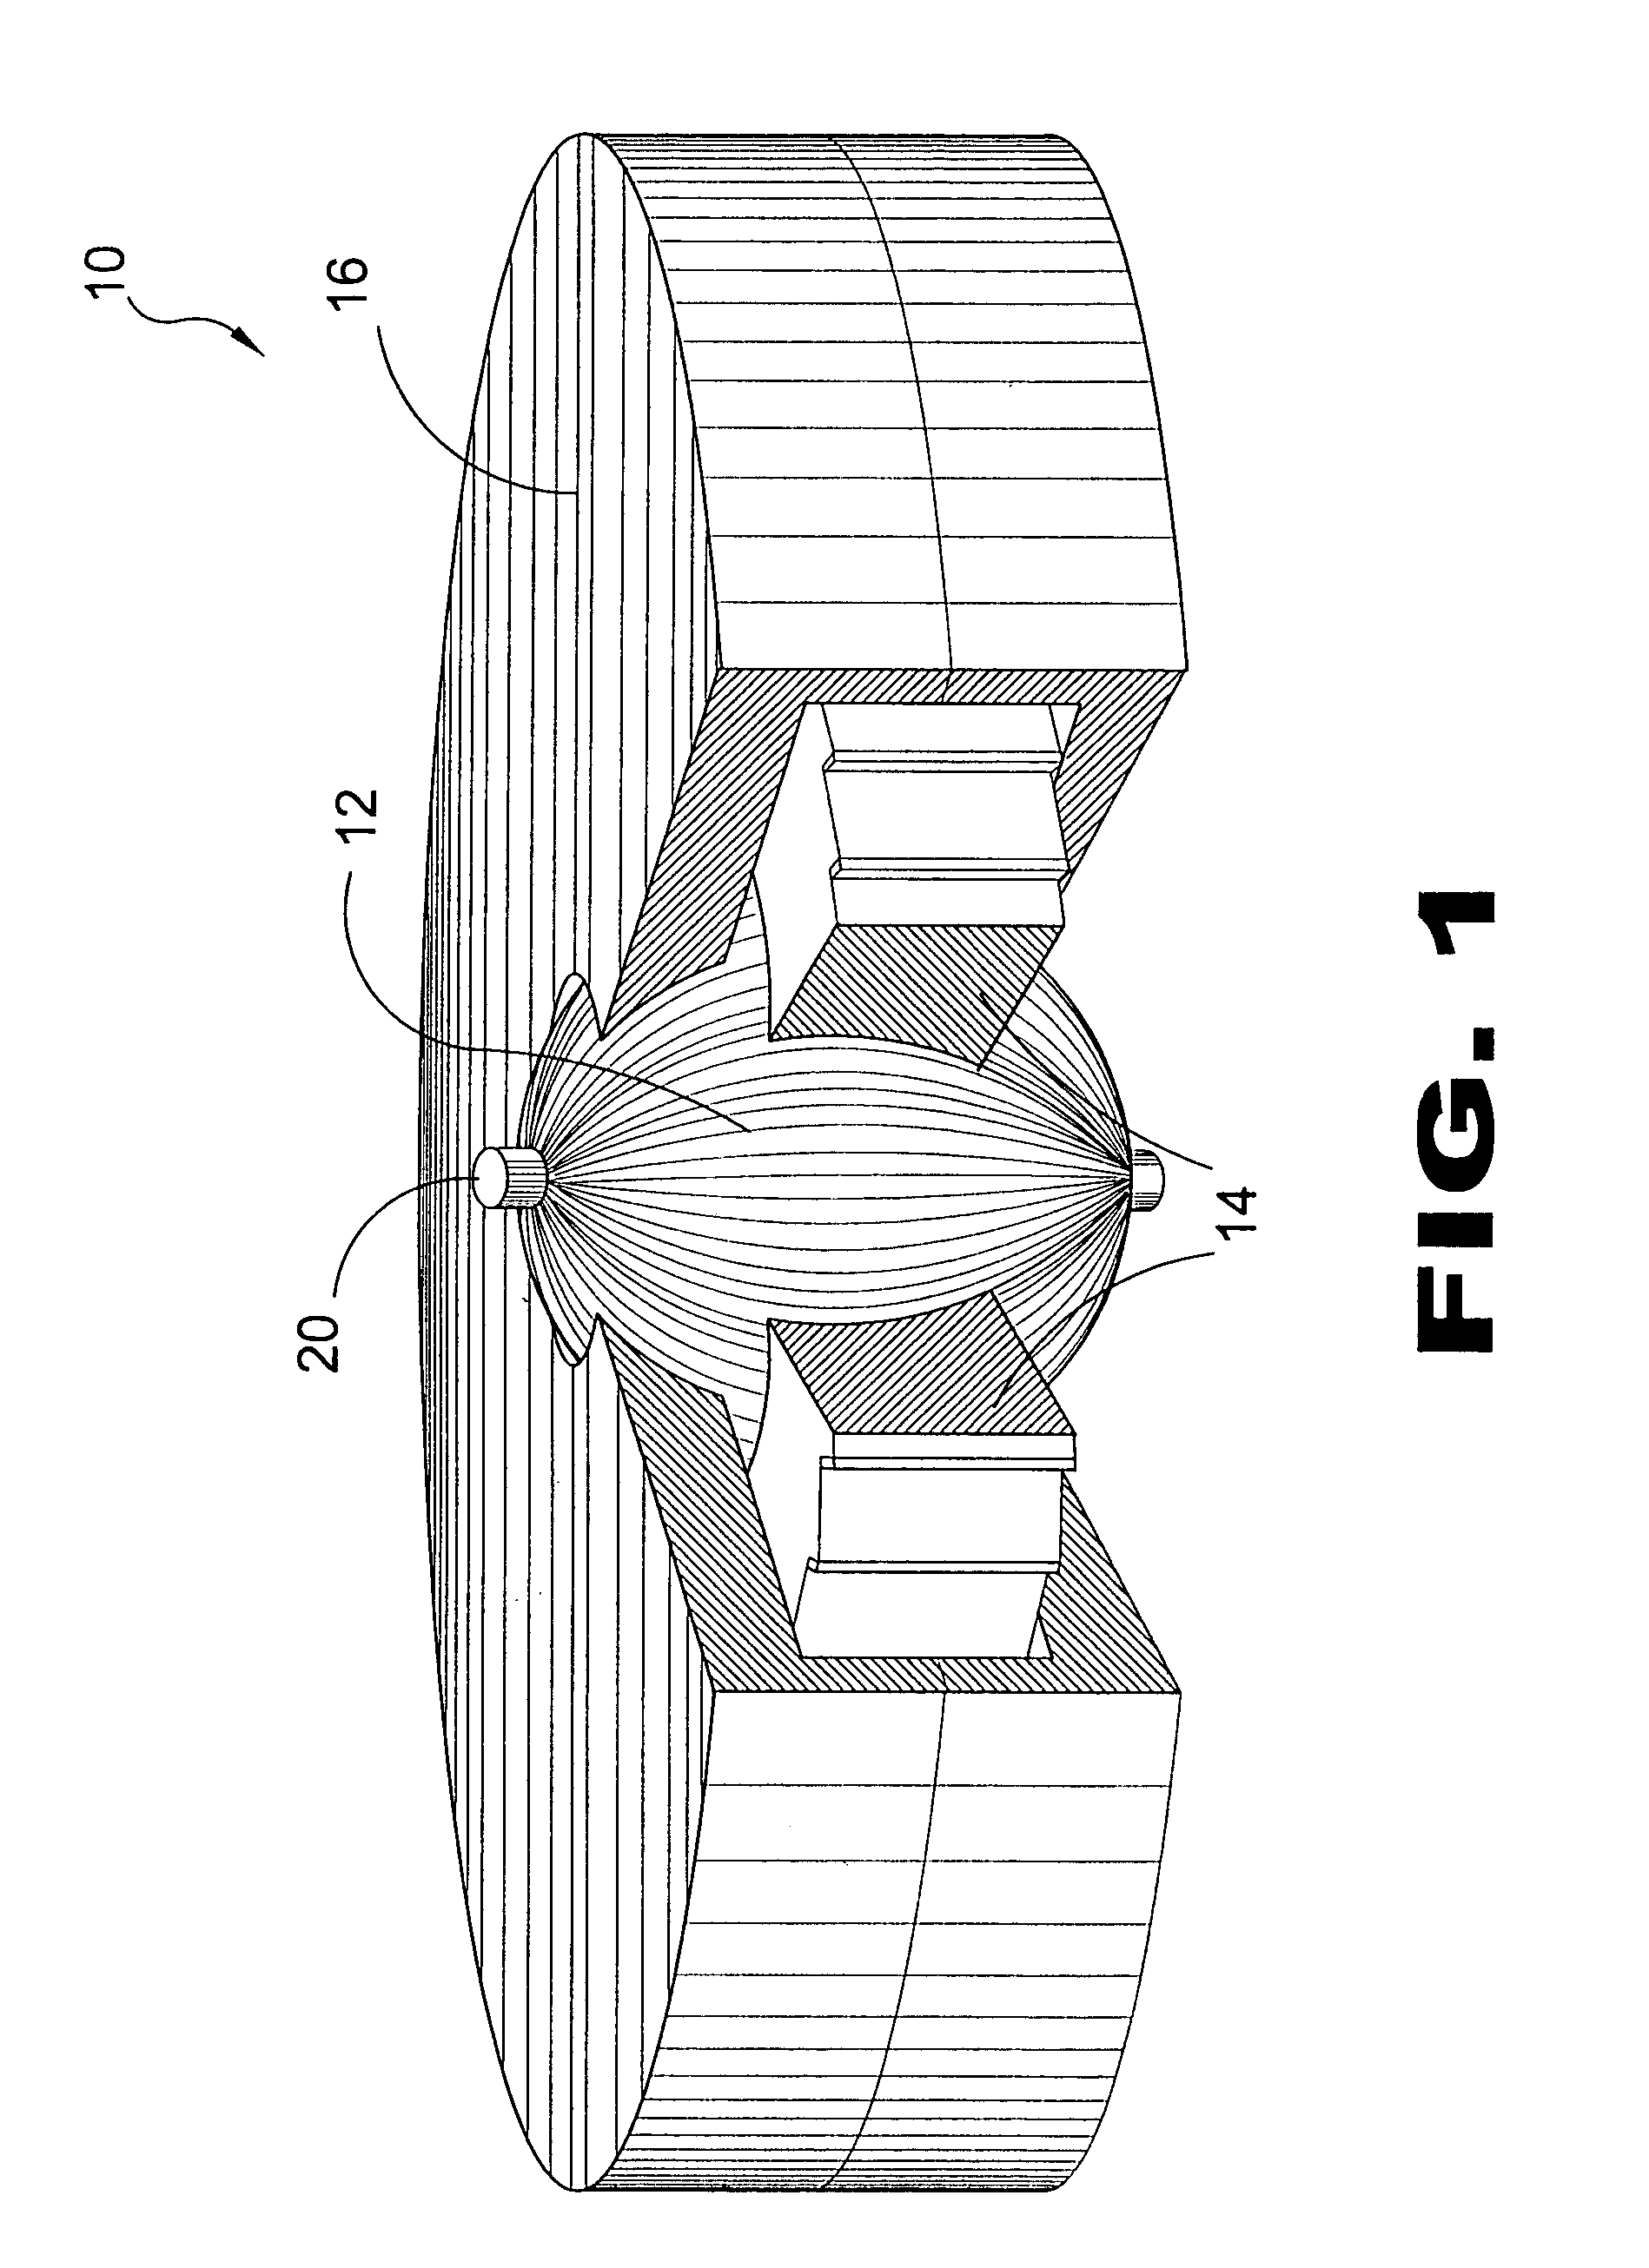 Magnetic field generating device